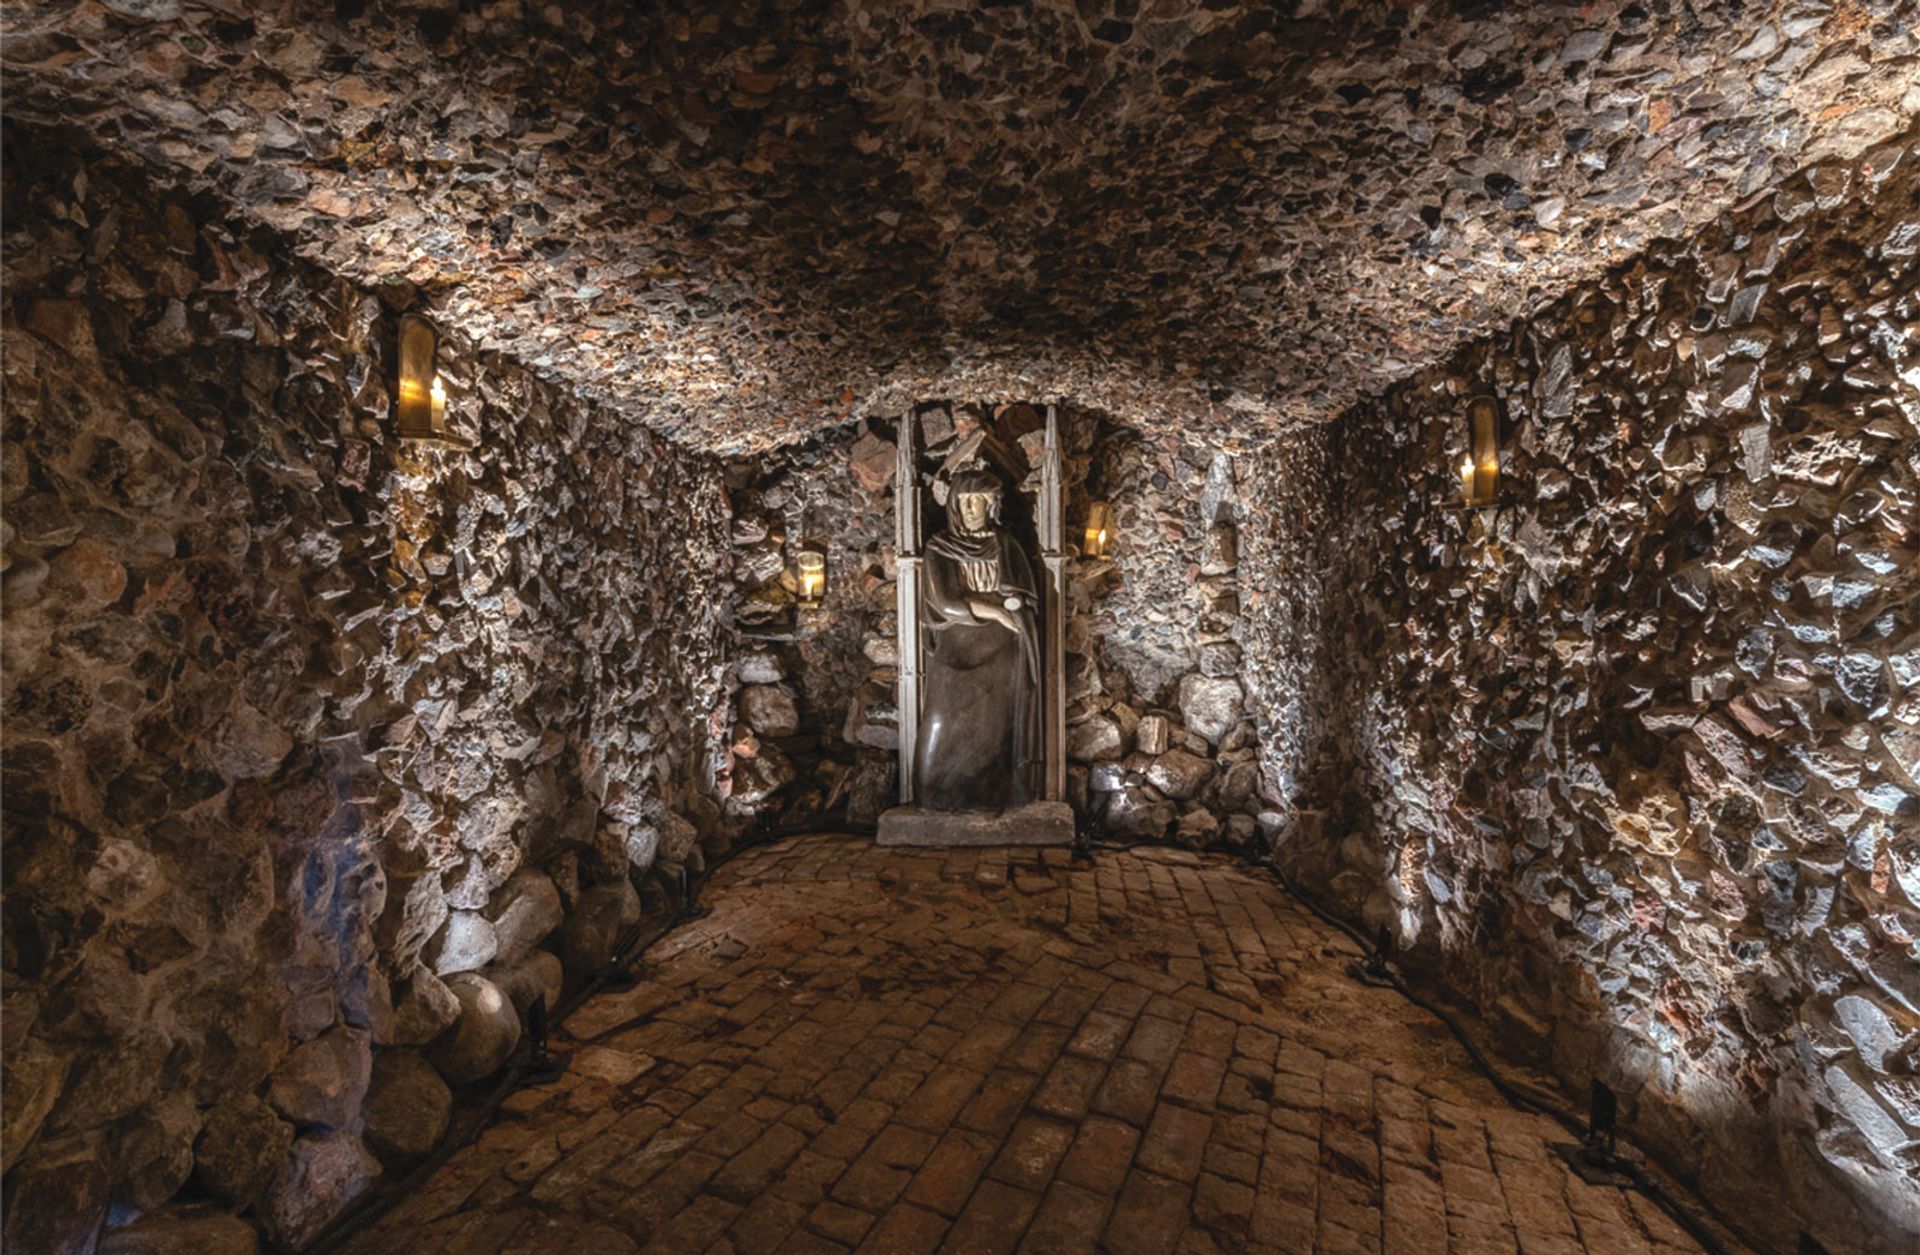 The south chamber of Alexander Pope’s grotto, beneath his now-demolished estate in Twickenham © Damian Griffith/Pope’s Grotto Preservation Trust